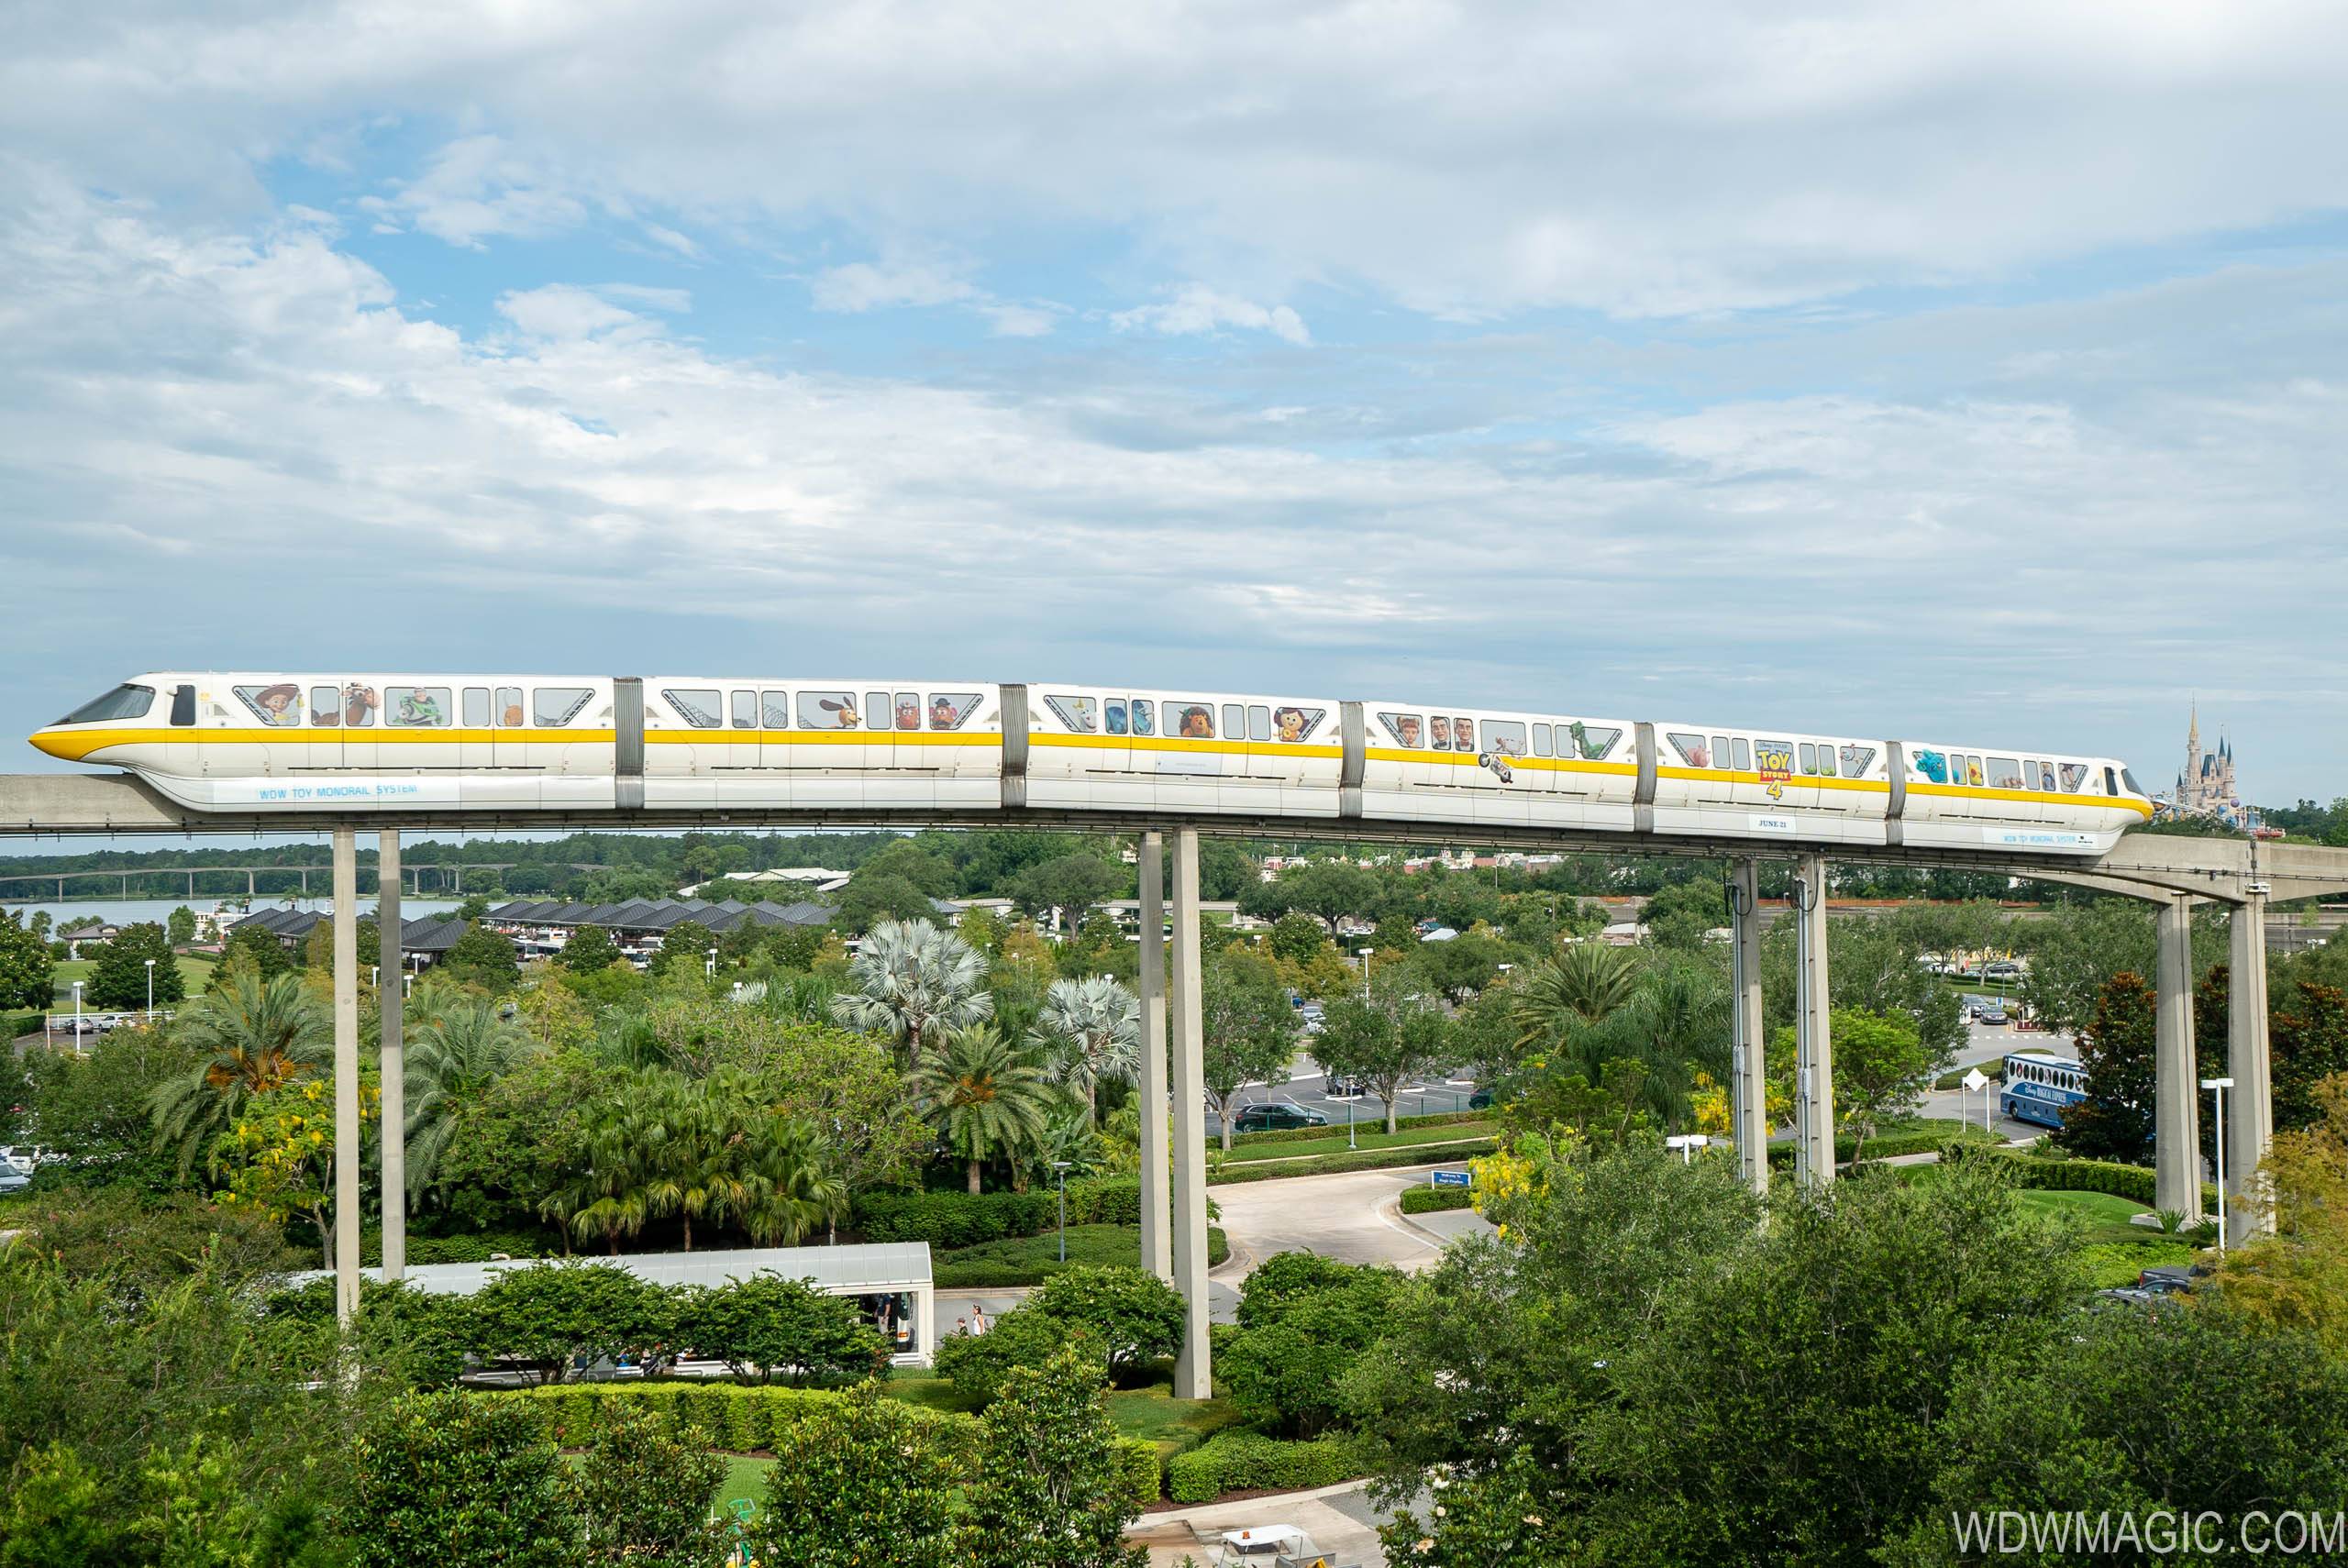 The Walt Disney World monorail system will return to service with the parks